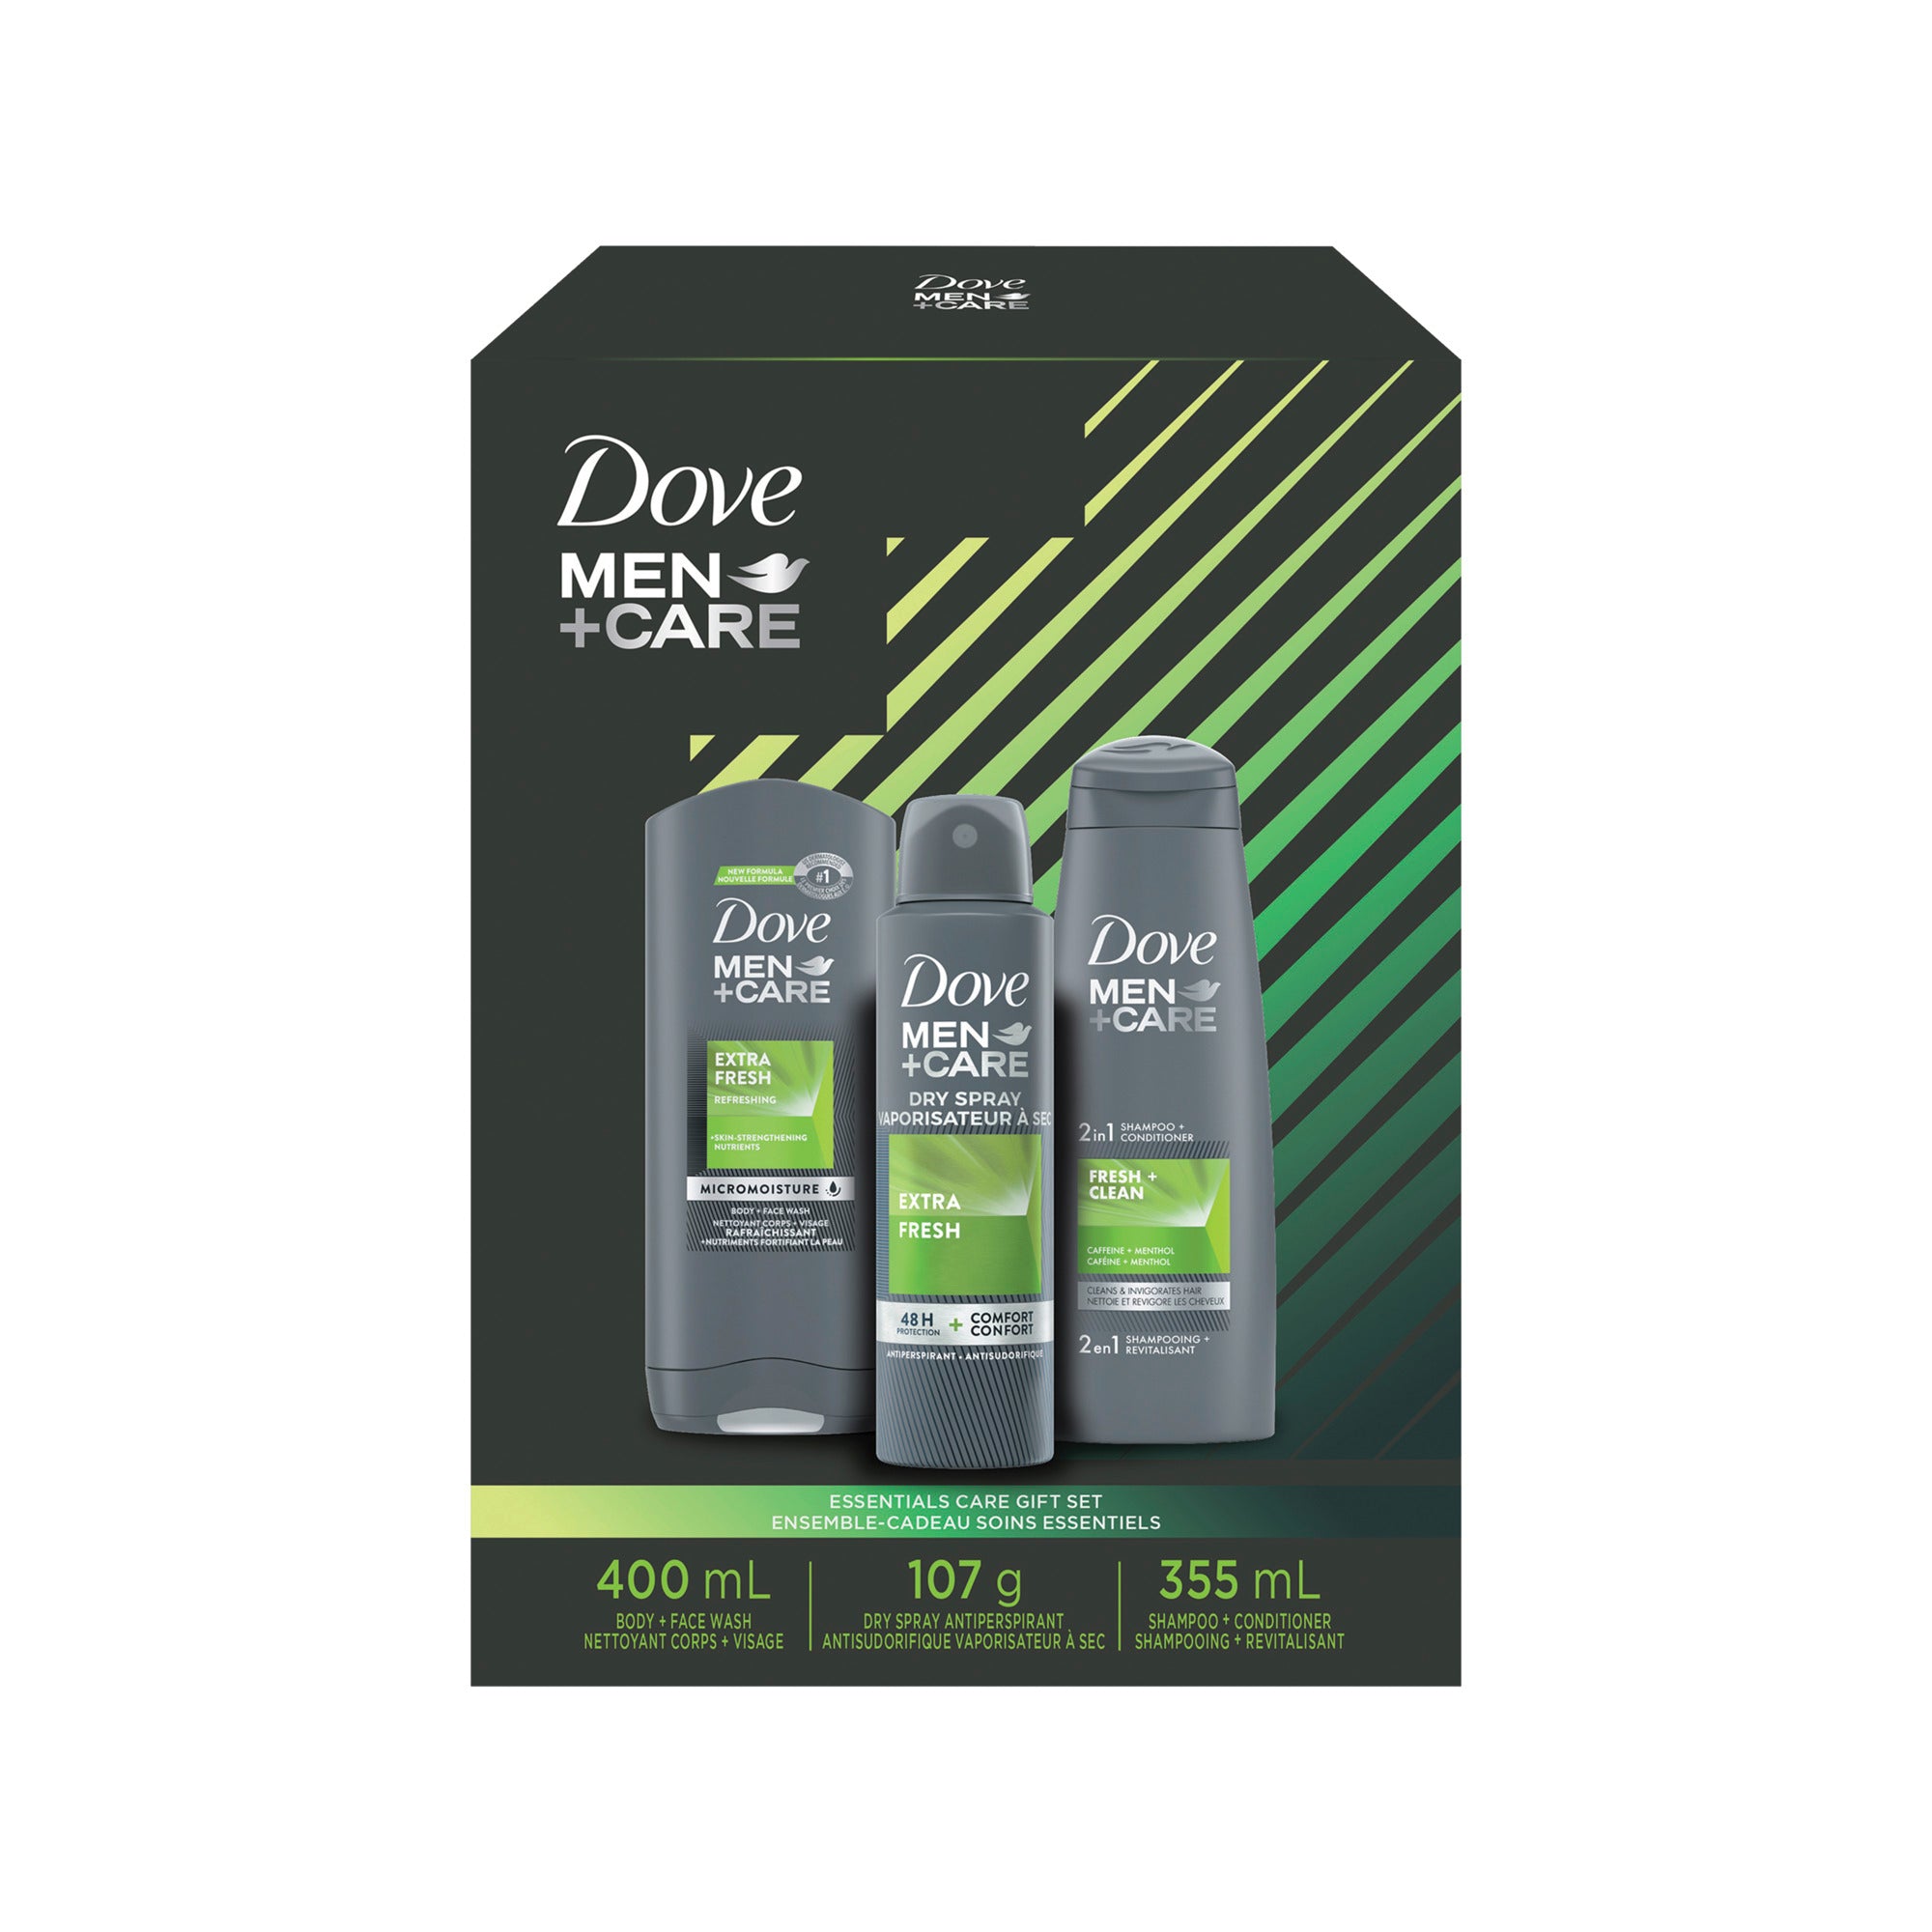 Showing the front angle view of the Dove Men+Care Extra Fresh Total Care Gift Set box.